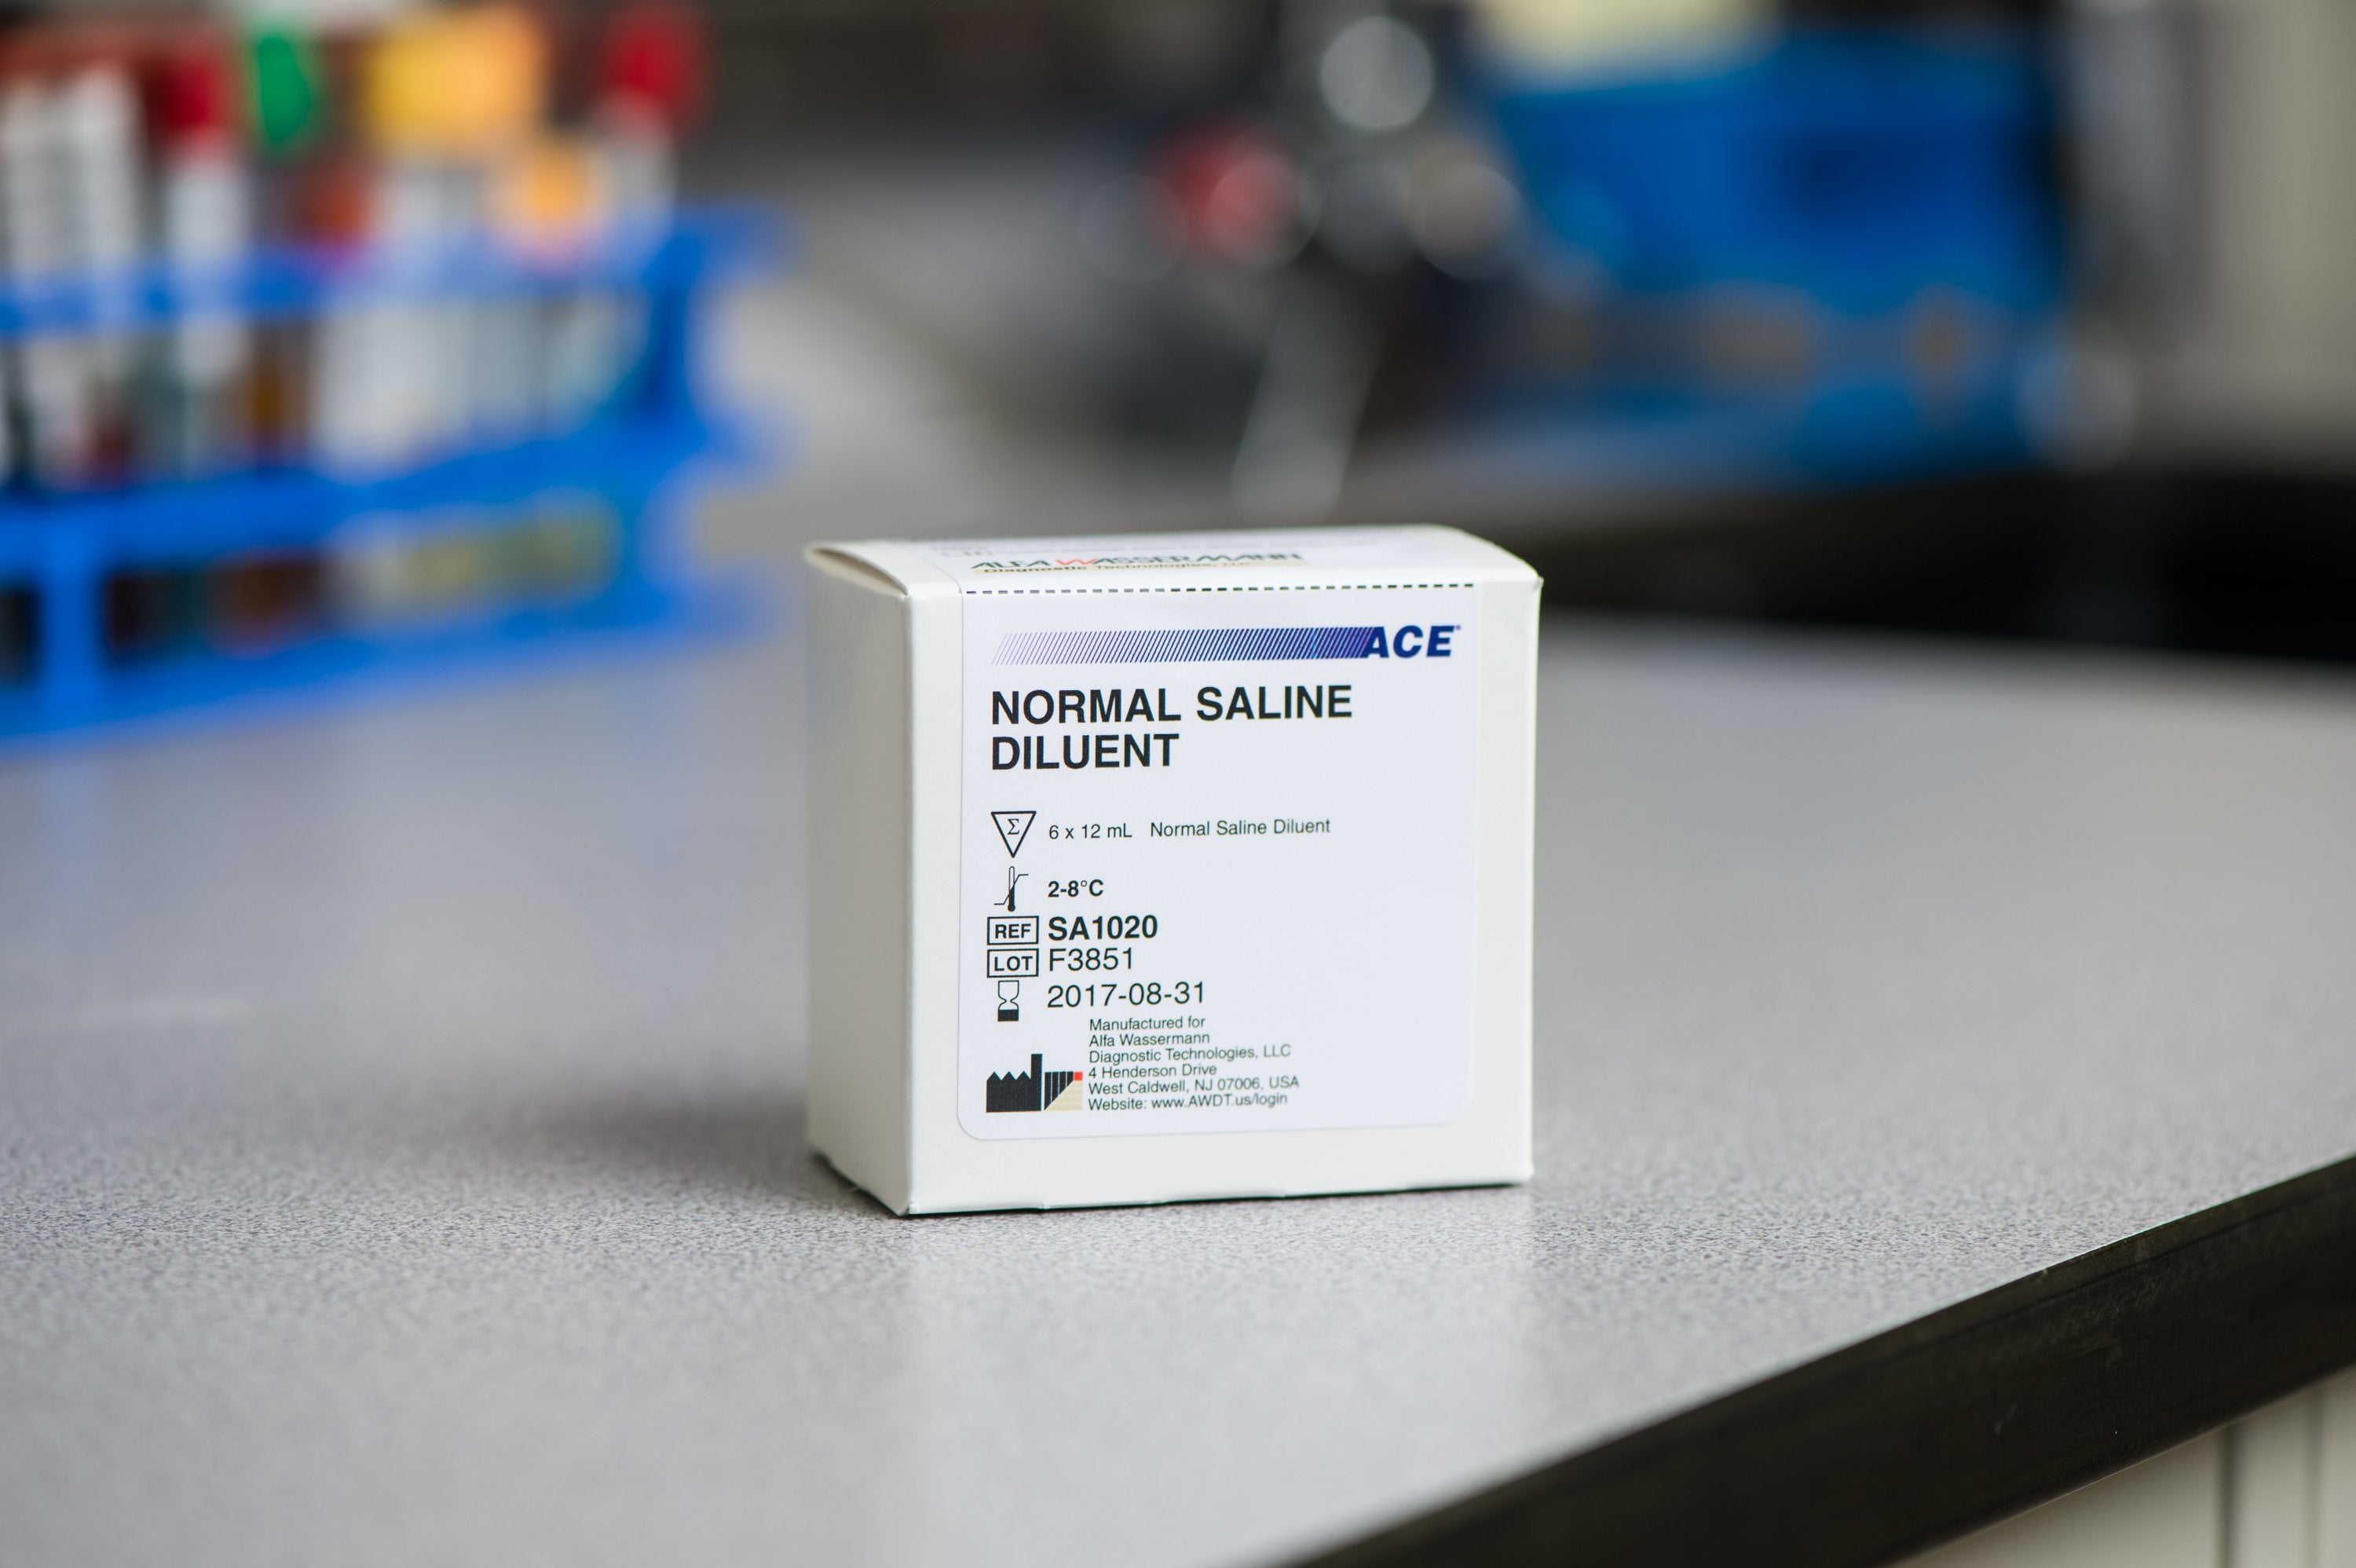 General Chemistry Reagent Diluent Normal Saline 0.9% For ACE and ACE Alera Analyzers